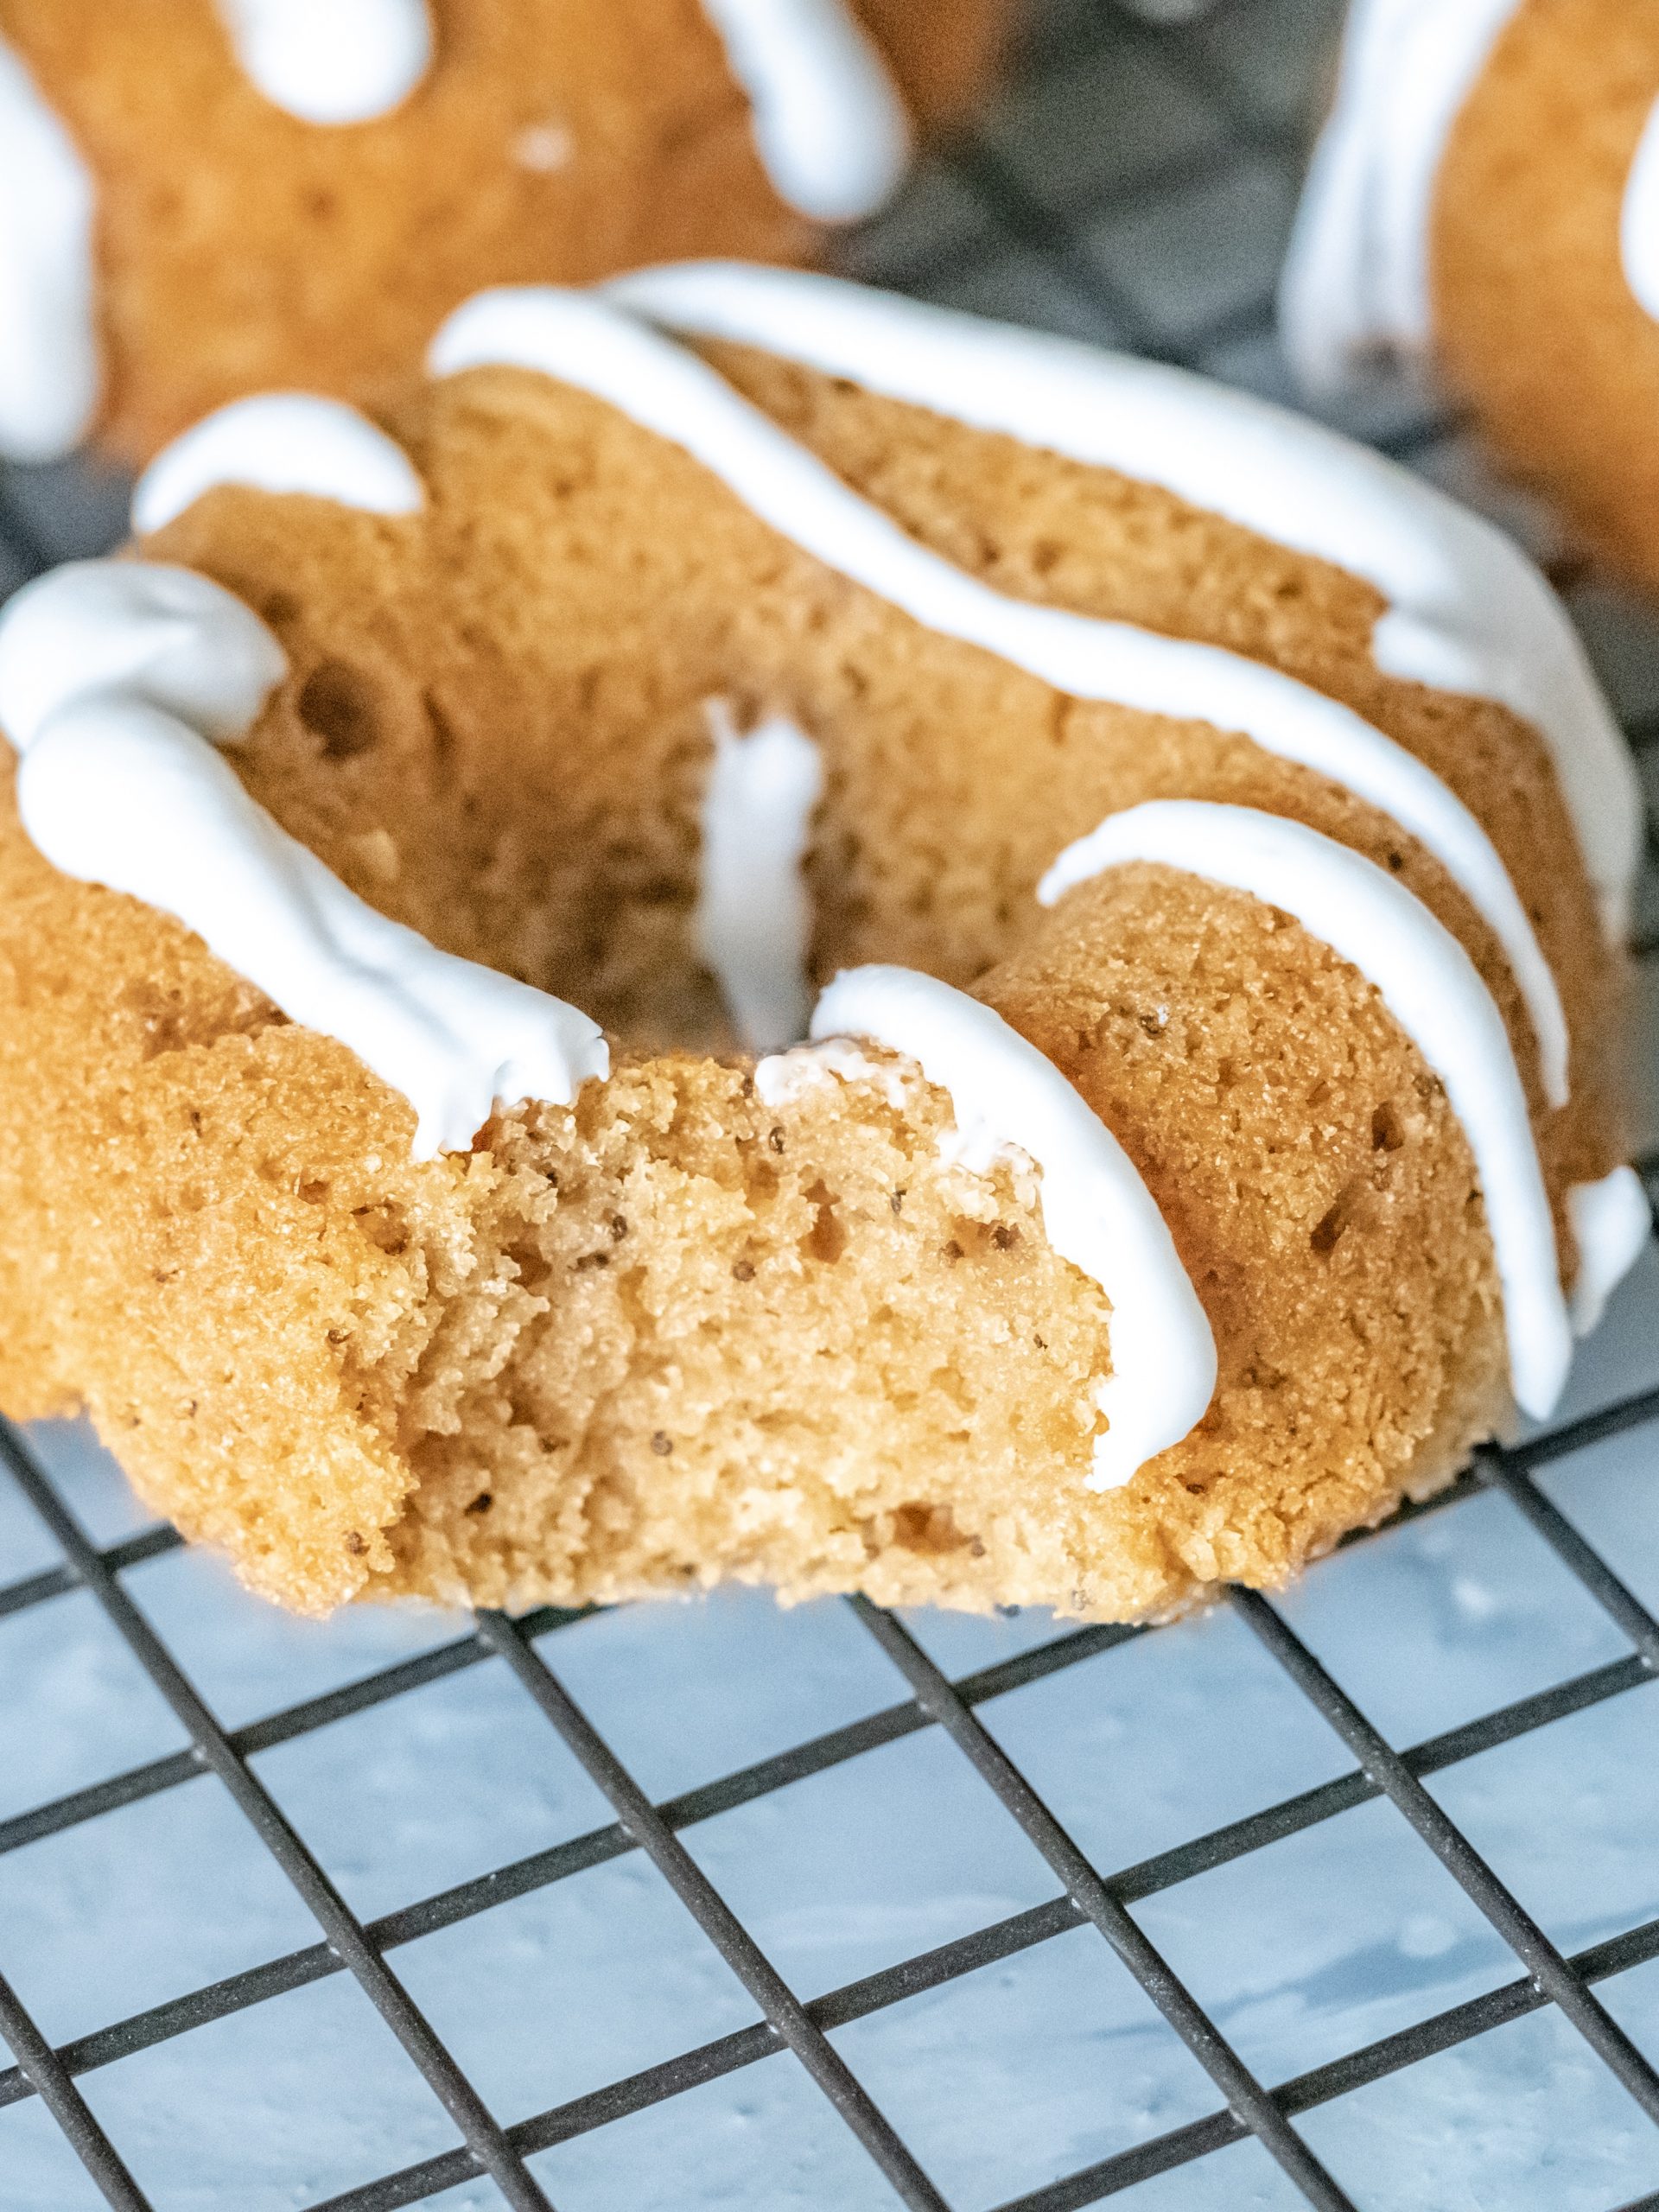 A gluten-free pumpkin donut drizzled with coconut whipped cream icing.